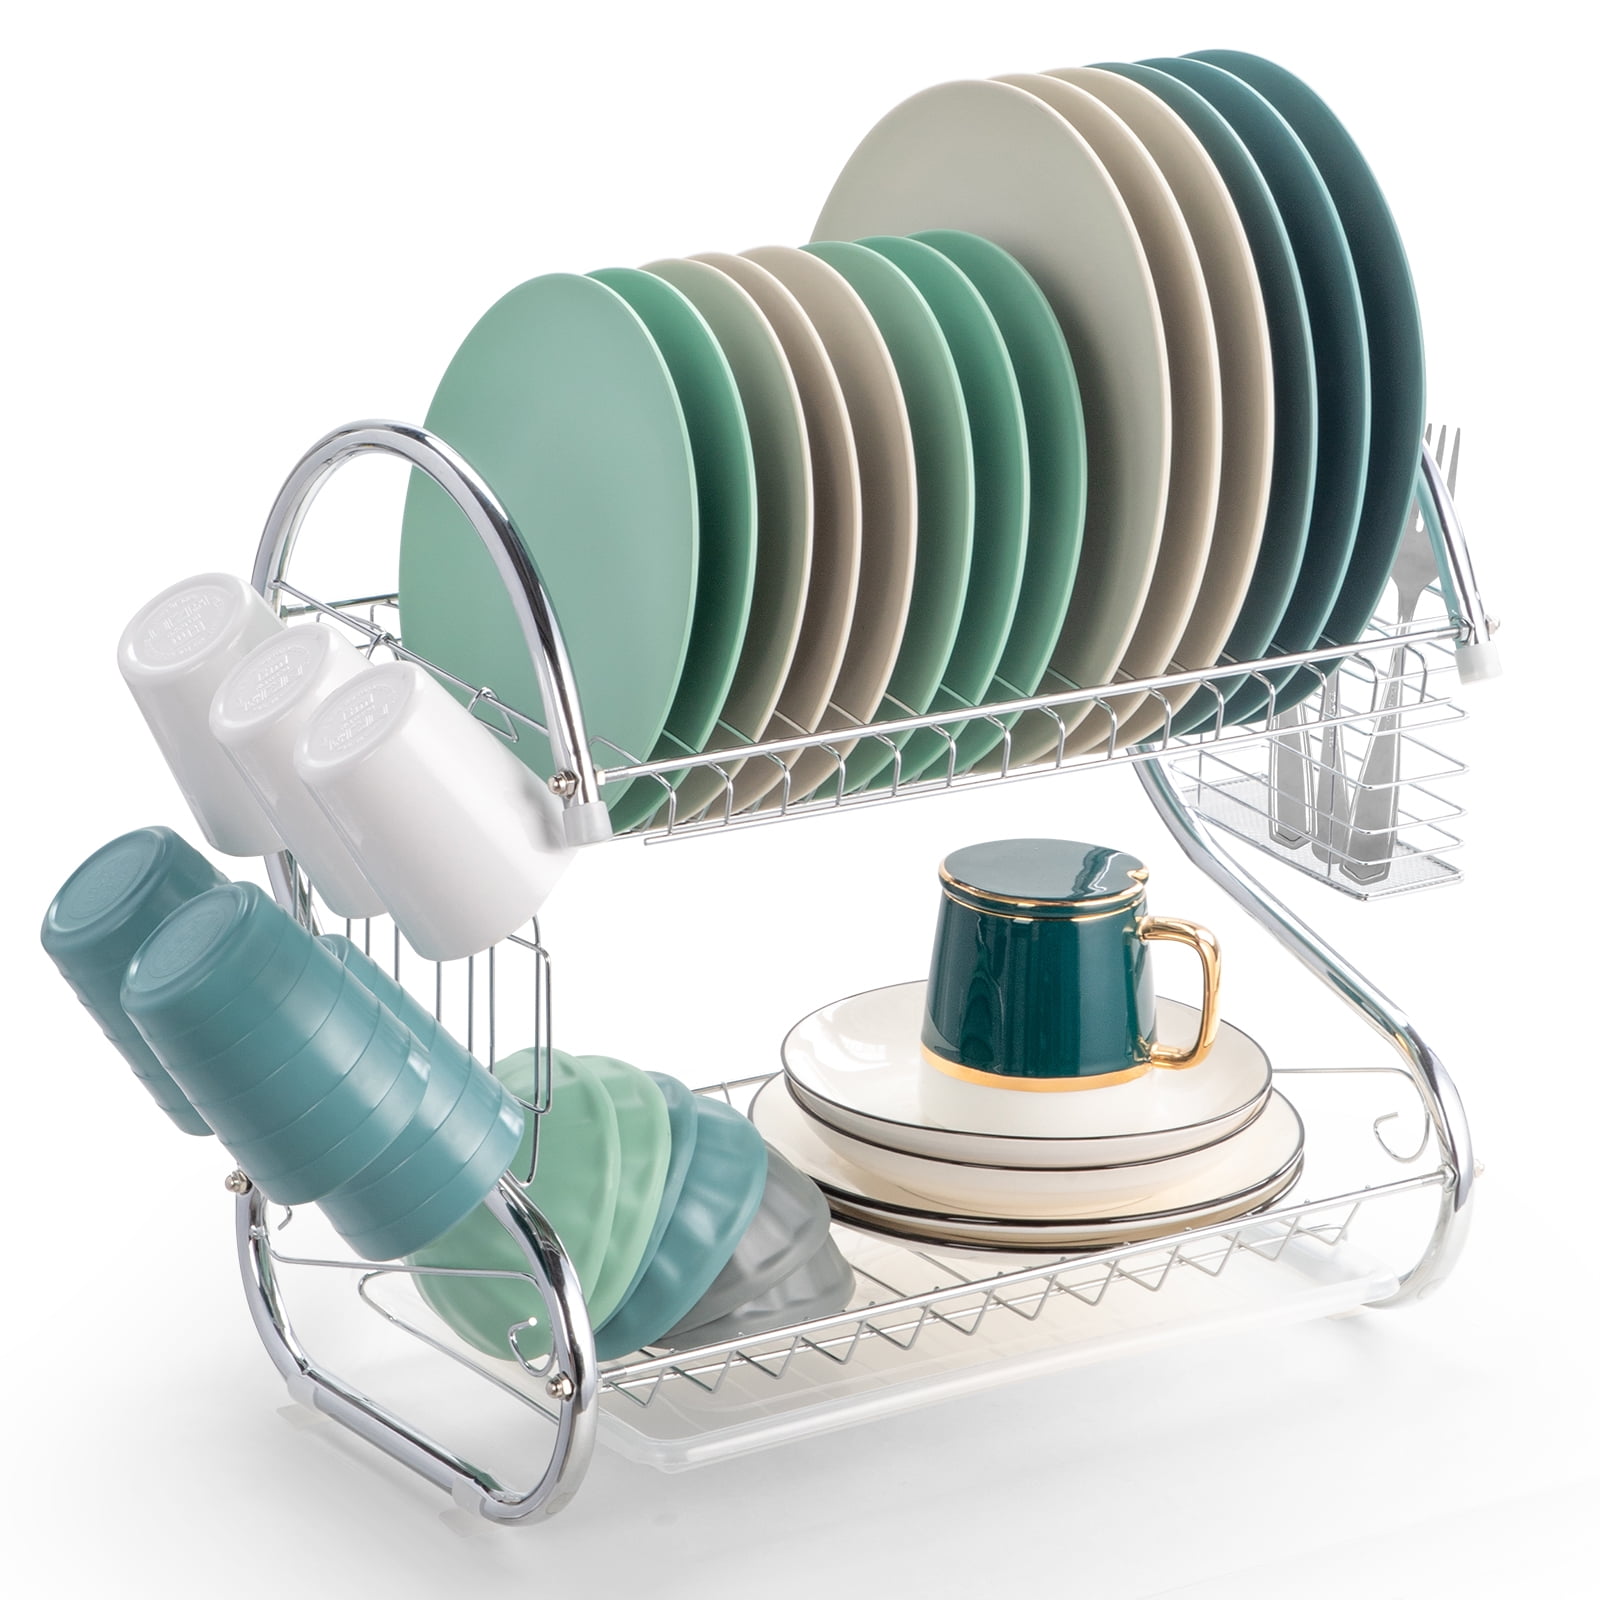 Cup Drying Rack Stand-6 Cup Metal Drainer Holder Rack- Non-Slip Mugs Cups  Organizer Kfc11014 - China Stainless Cup Holder Rack and Cup Holder price